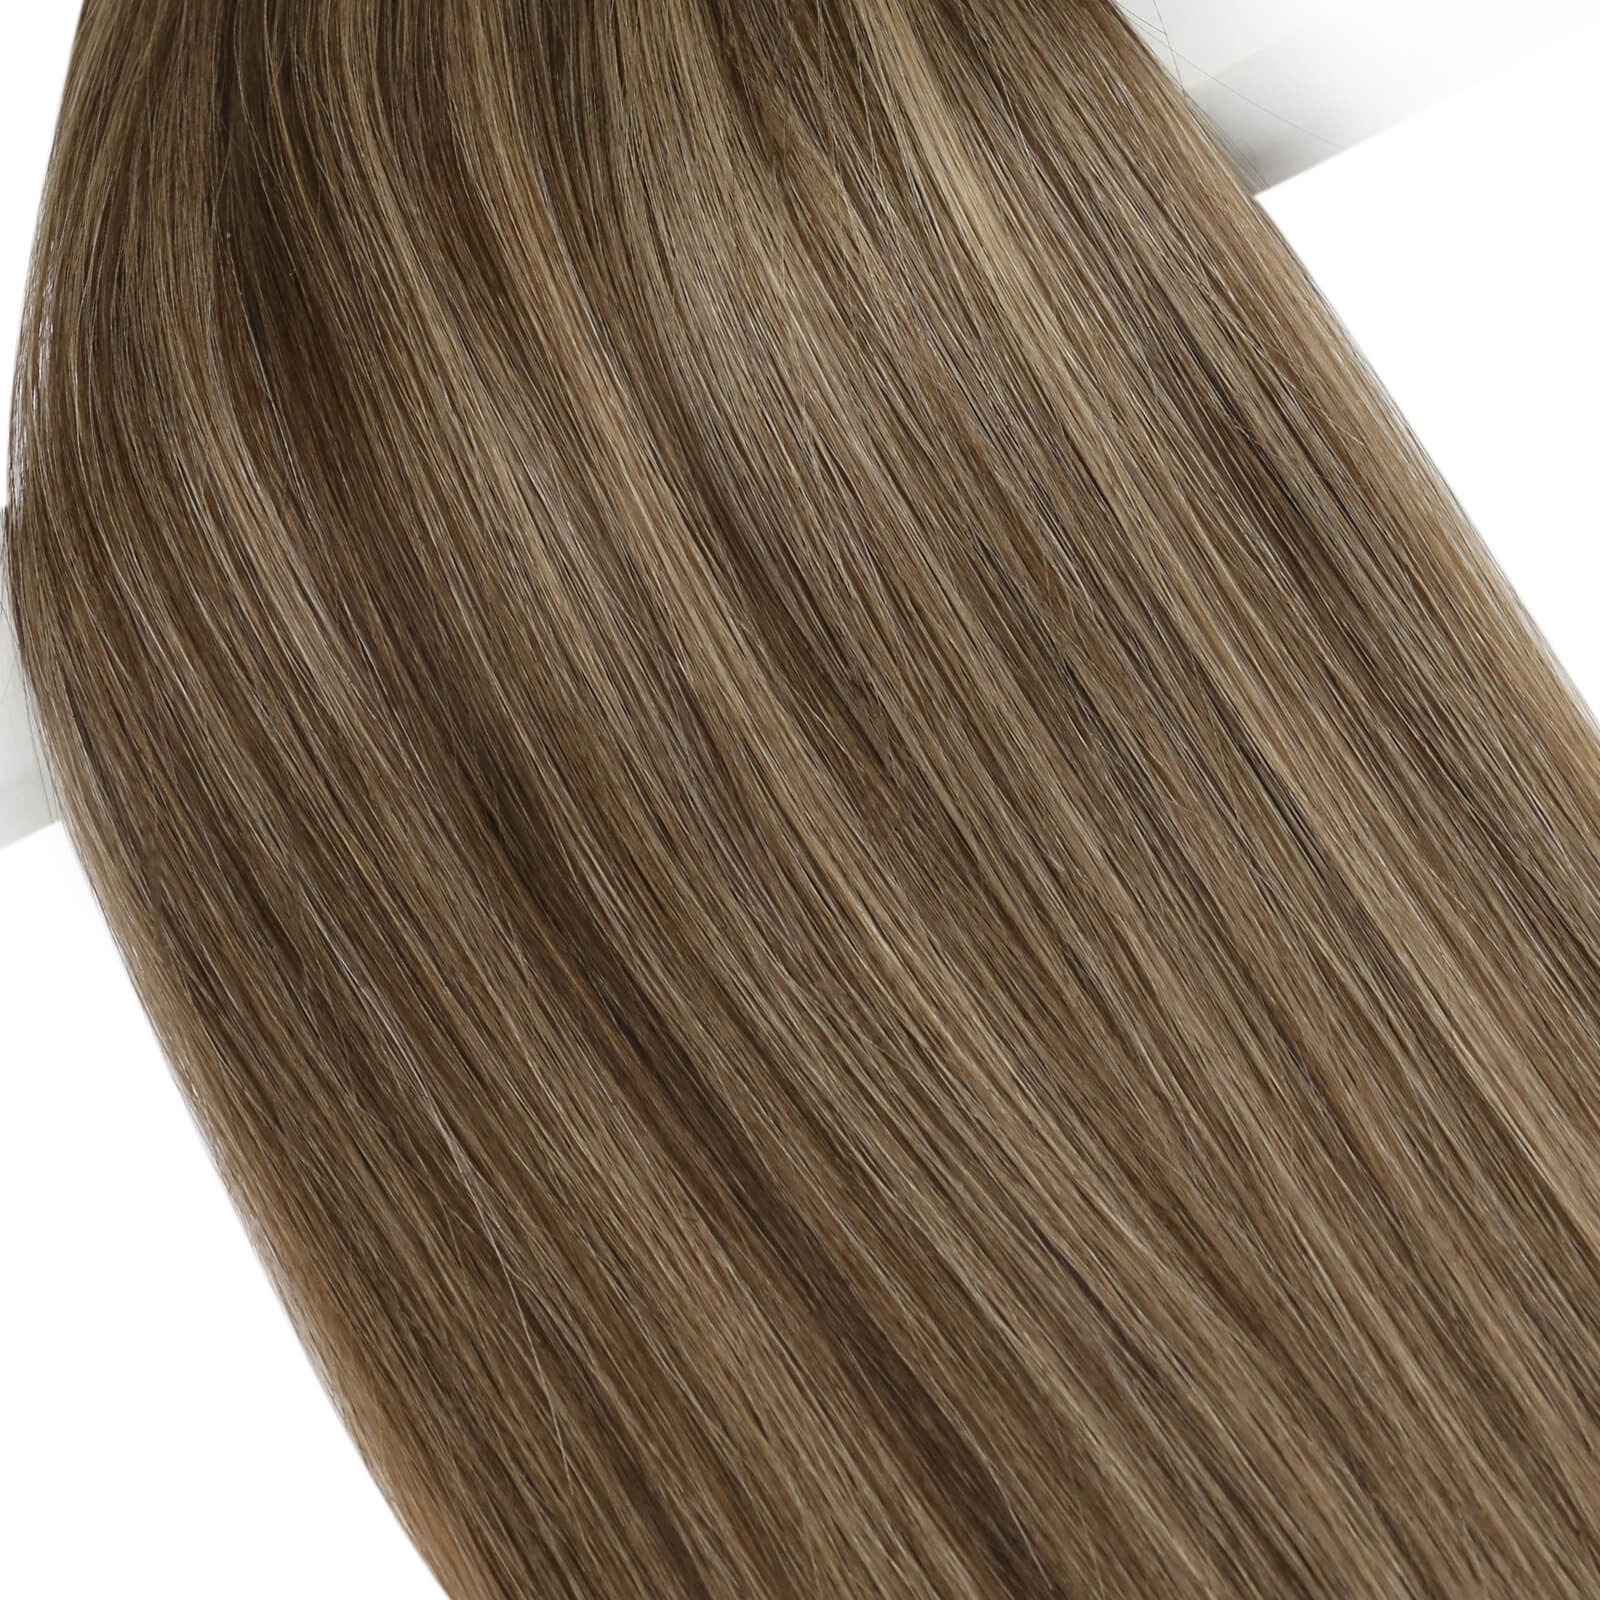 hybrid weft professional weft hair extensions